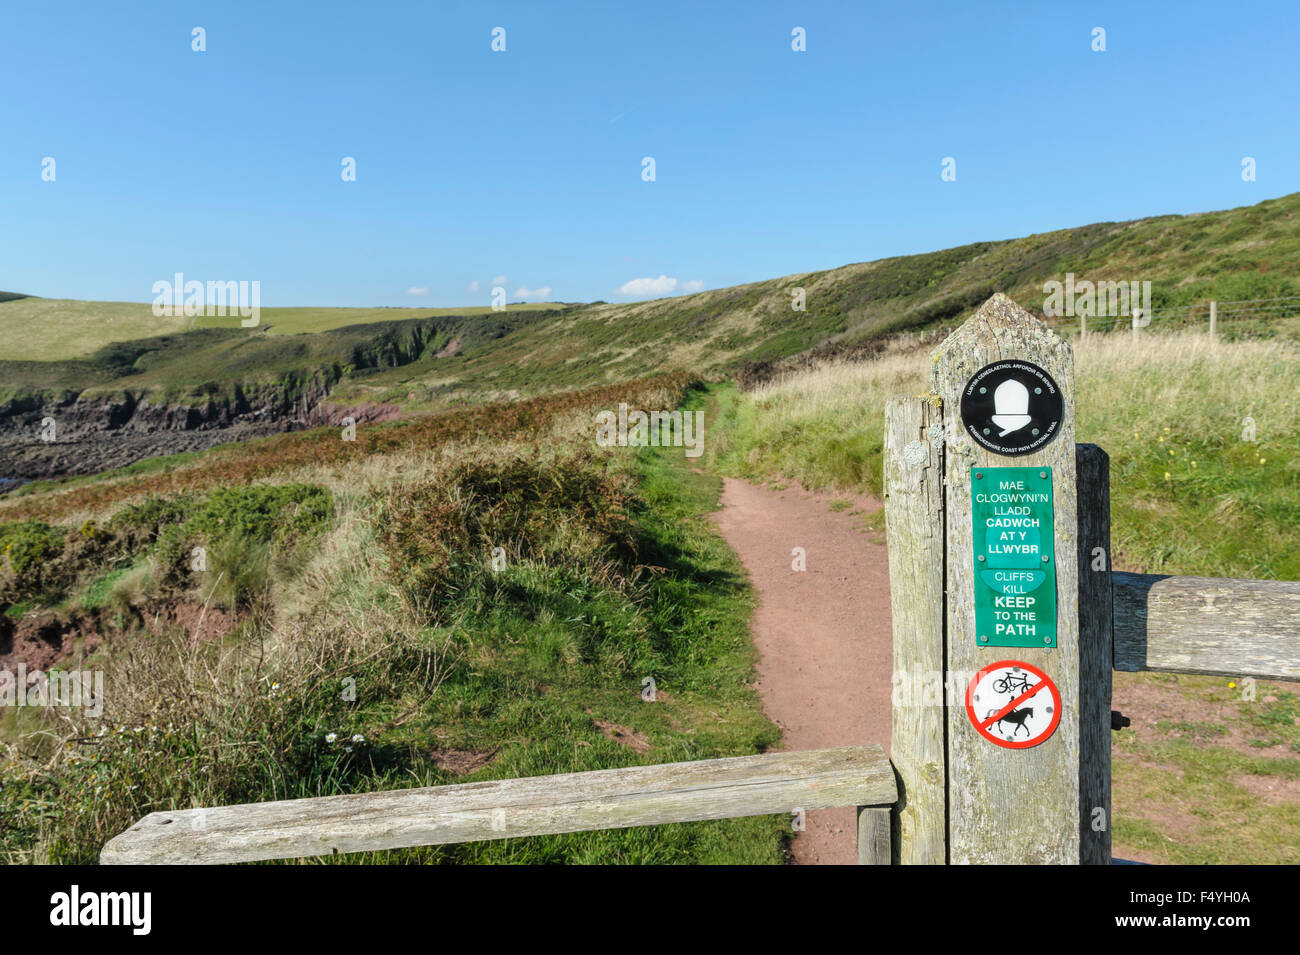 Signpost for the Pembrokeshire coast path. National park footpath sign.Trail. Stock Photo